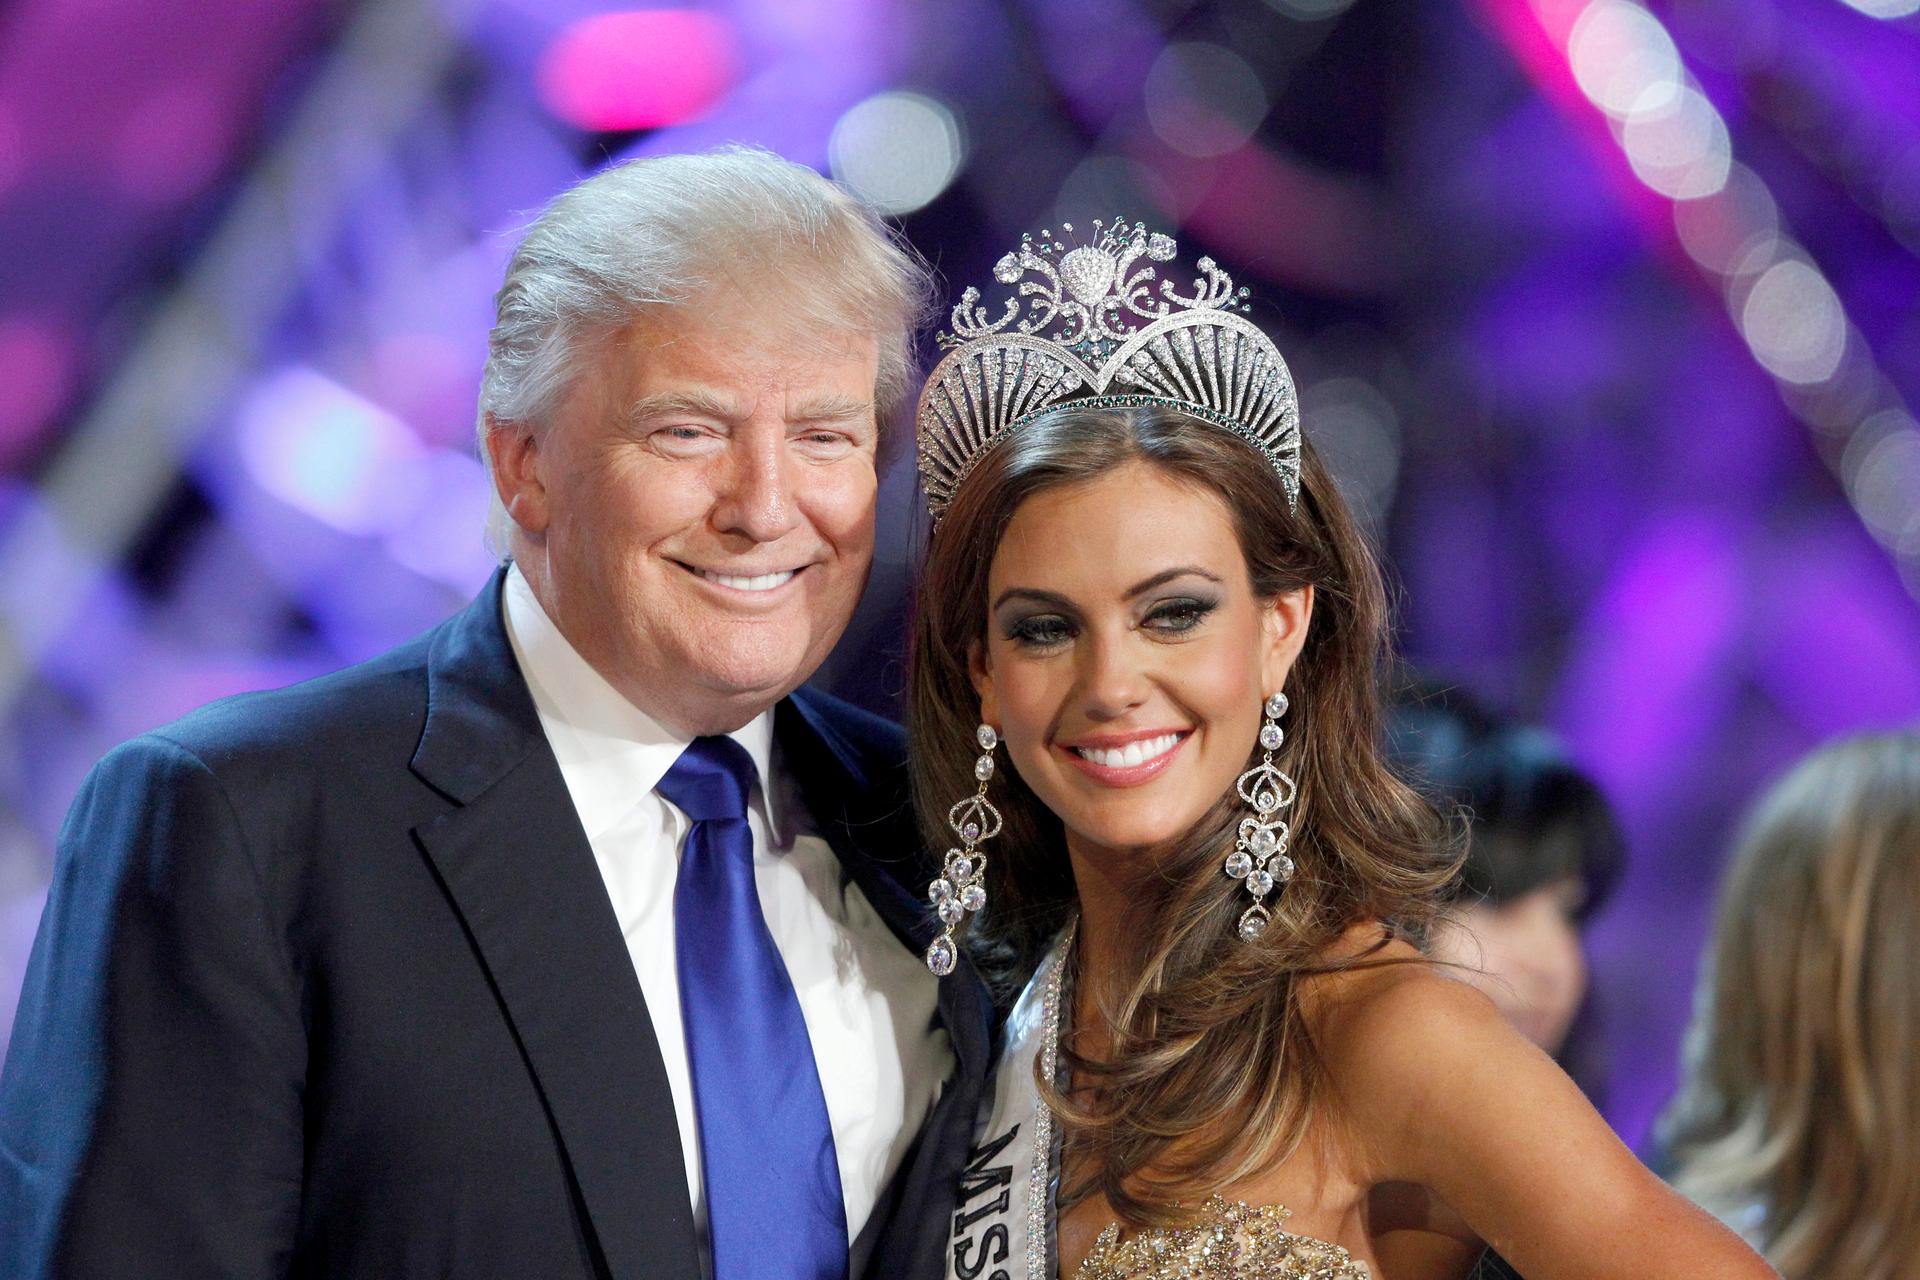 Donald Trump, back in 2013 when Univision was still interested in airing the Miss USA beauty contest,  a franchise the businessman co-owns. On June 25th Univision cut ties with the pageant and all other businesses associated Trump after he made negative r